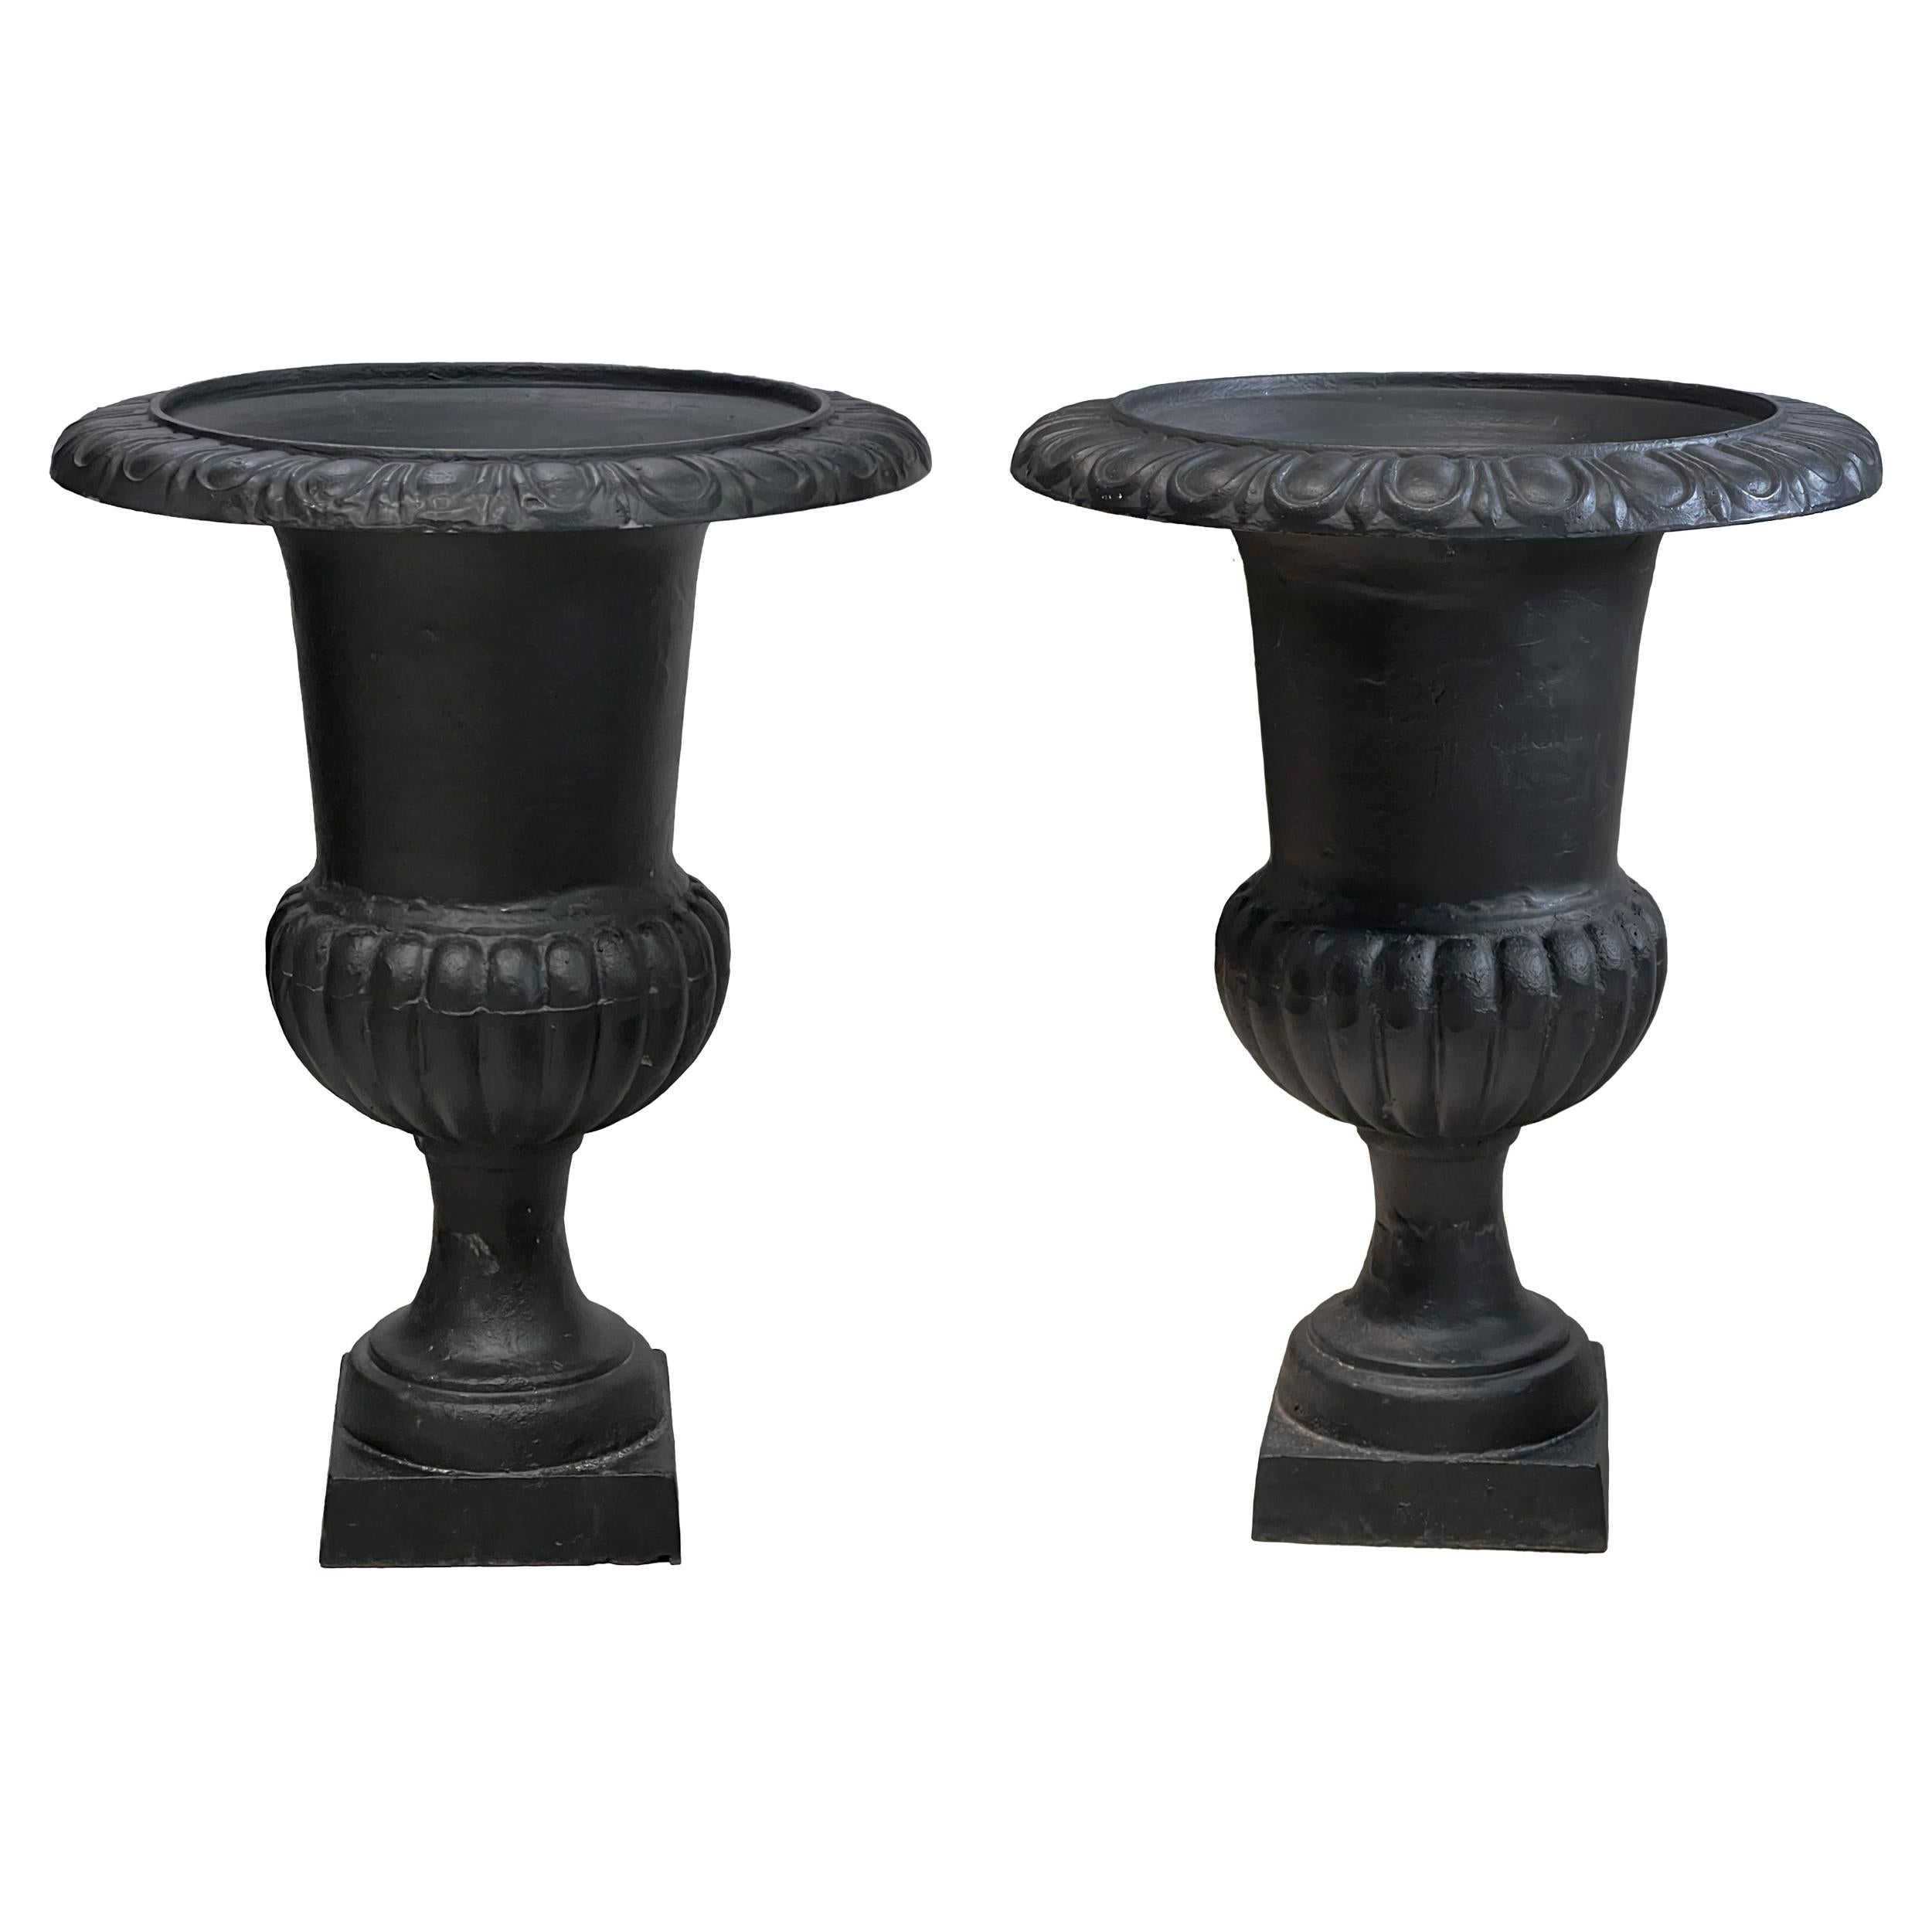 Unknown French Neoclassical-Style Large Cast Iron Garden Urns or Planters, Set of 2 For Sale